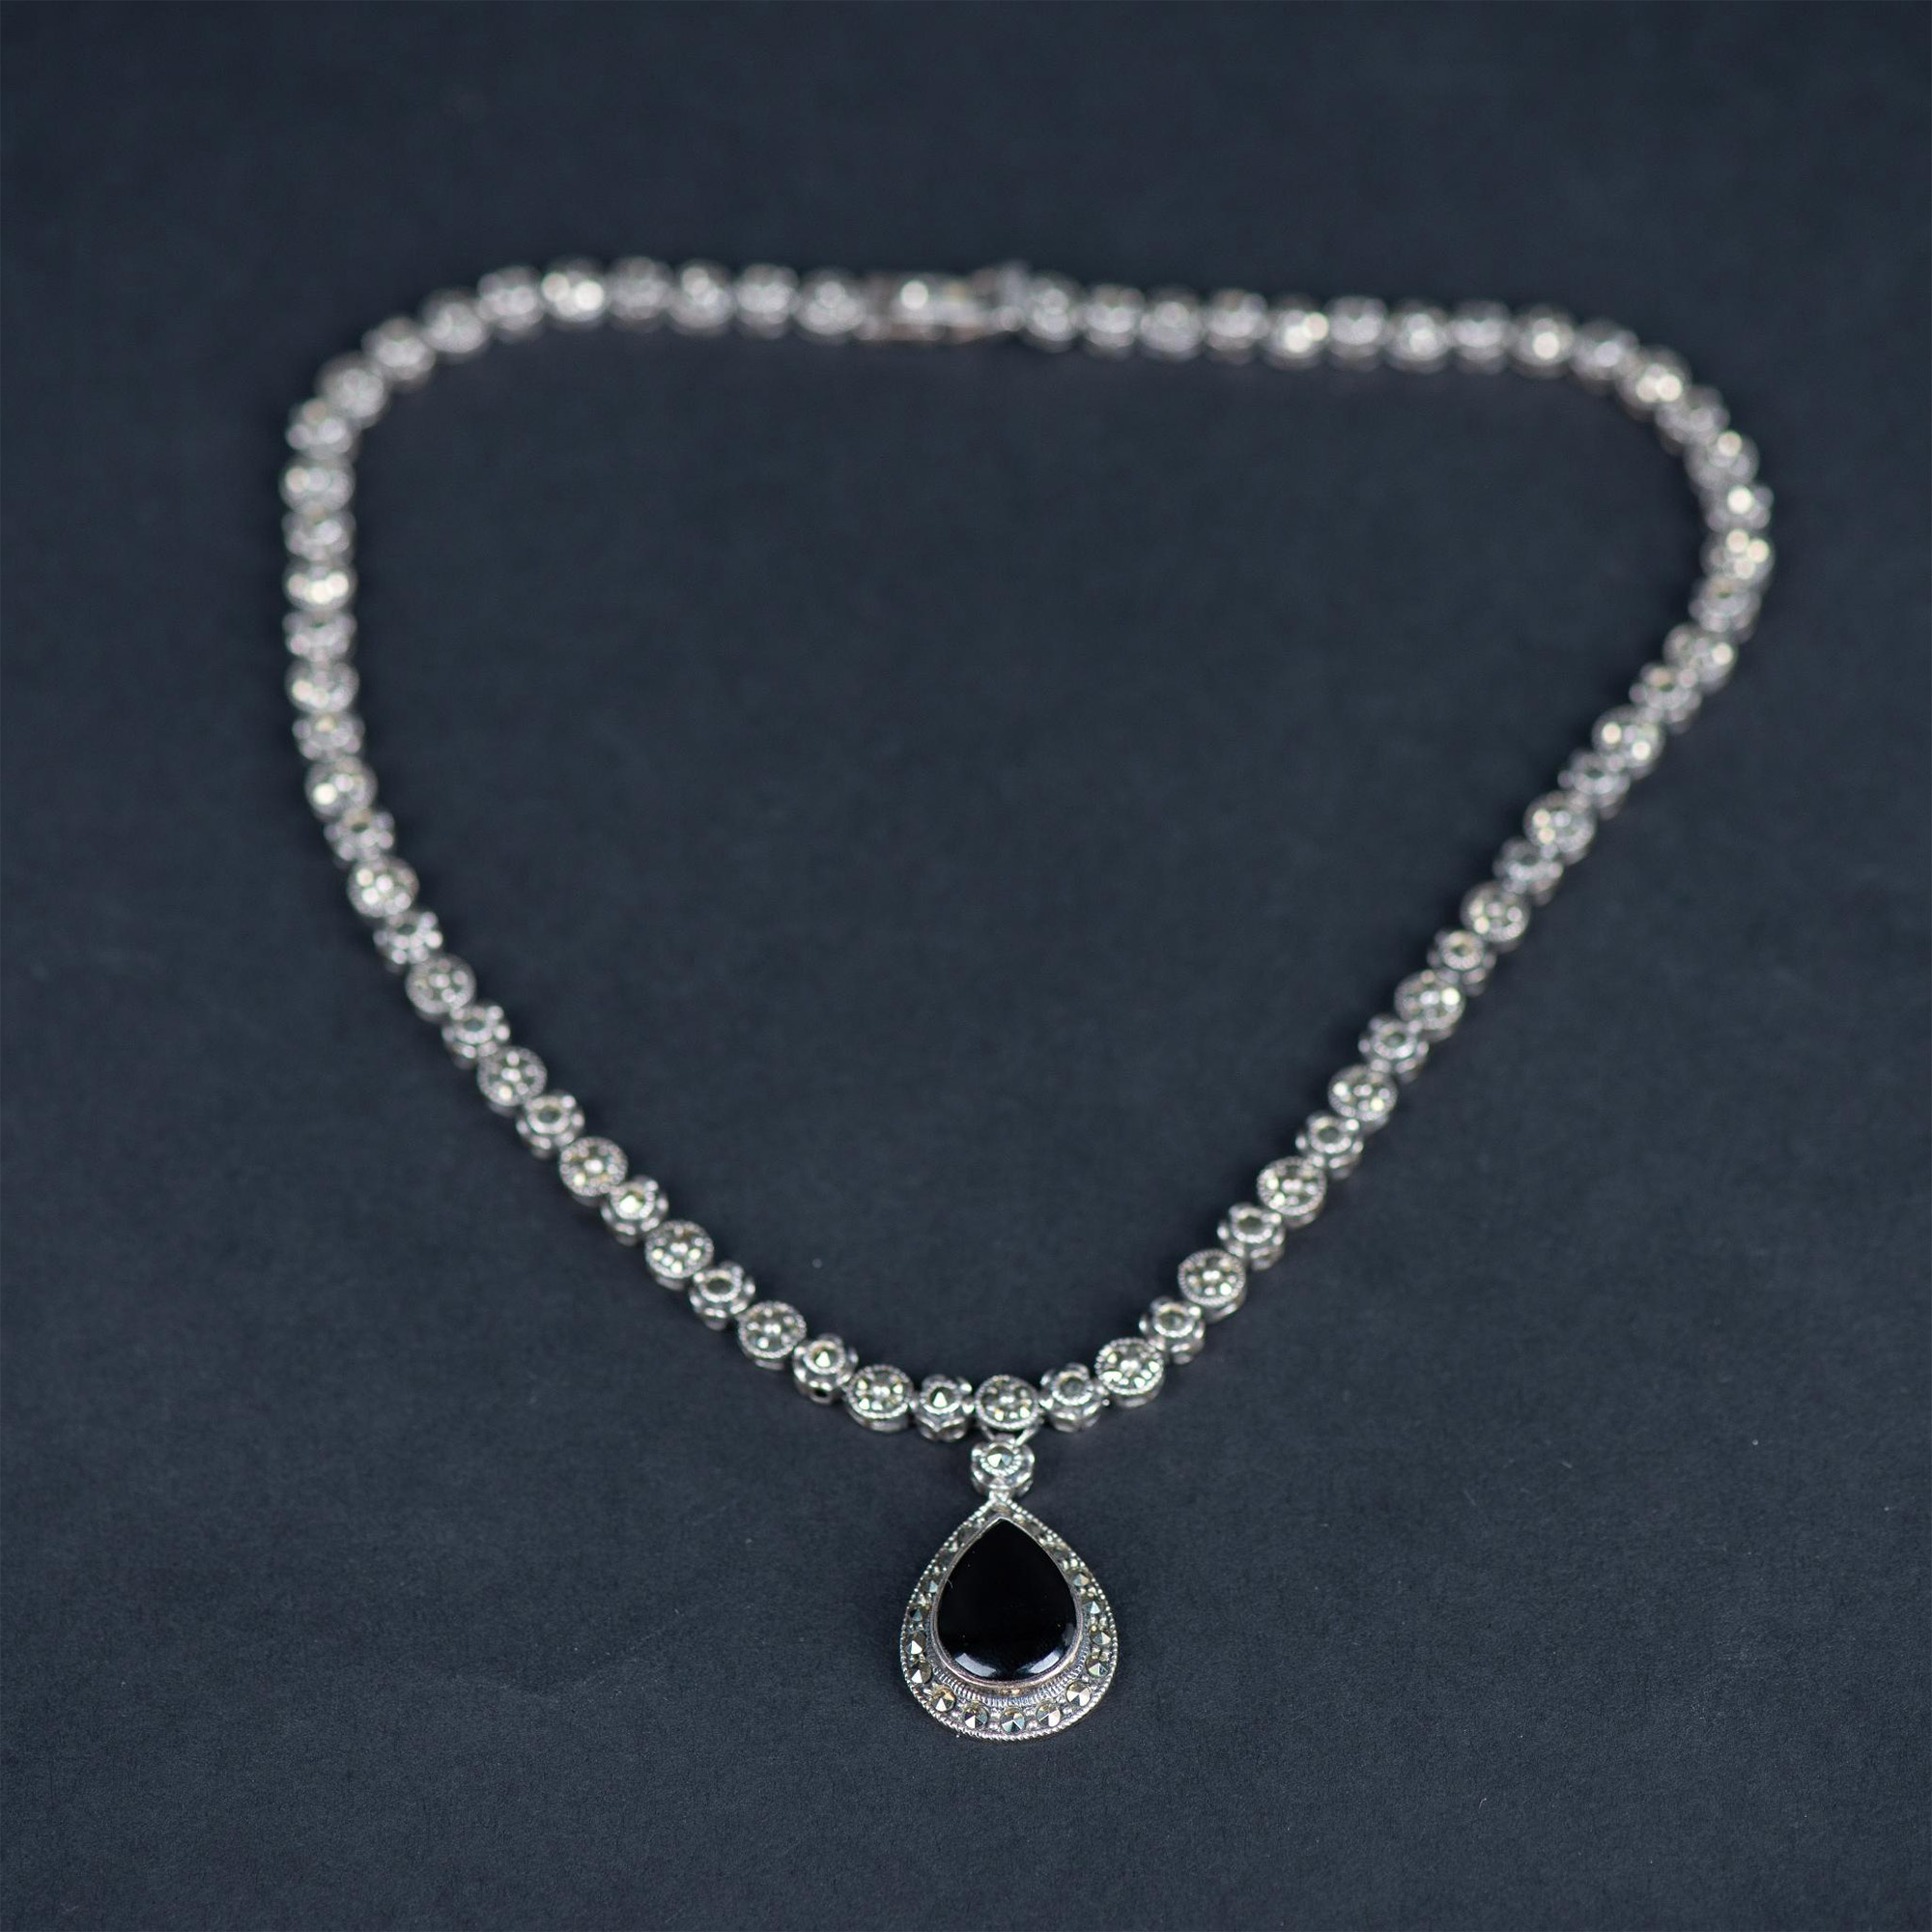 Pretty Sterling Silver, Marcasite, and Onyx Necklace - Image 4 of 6